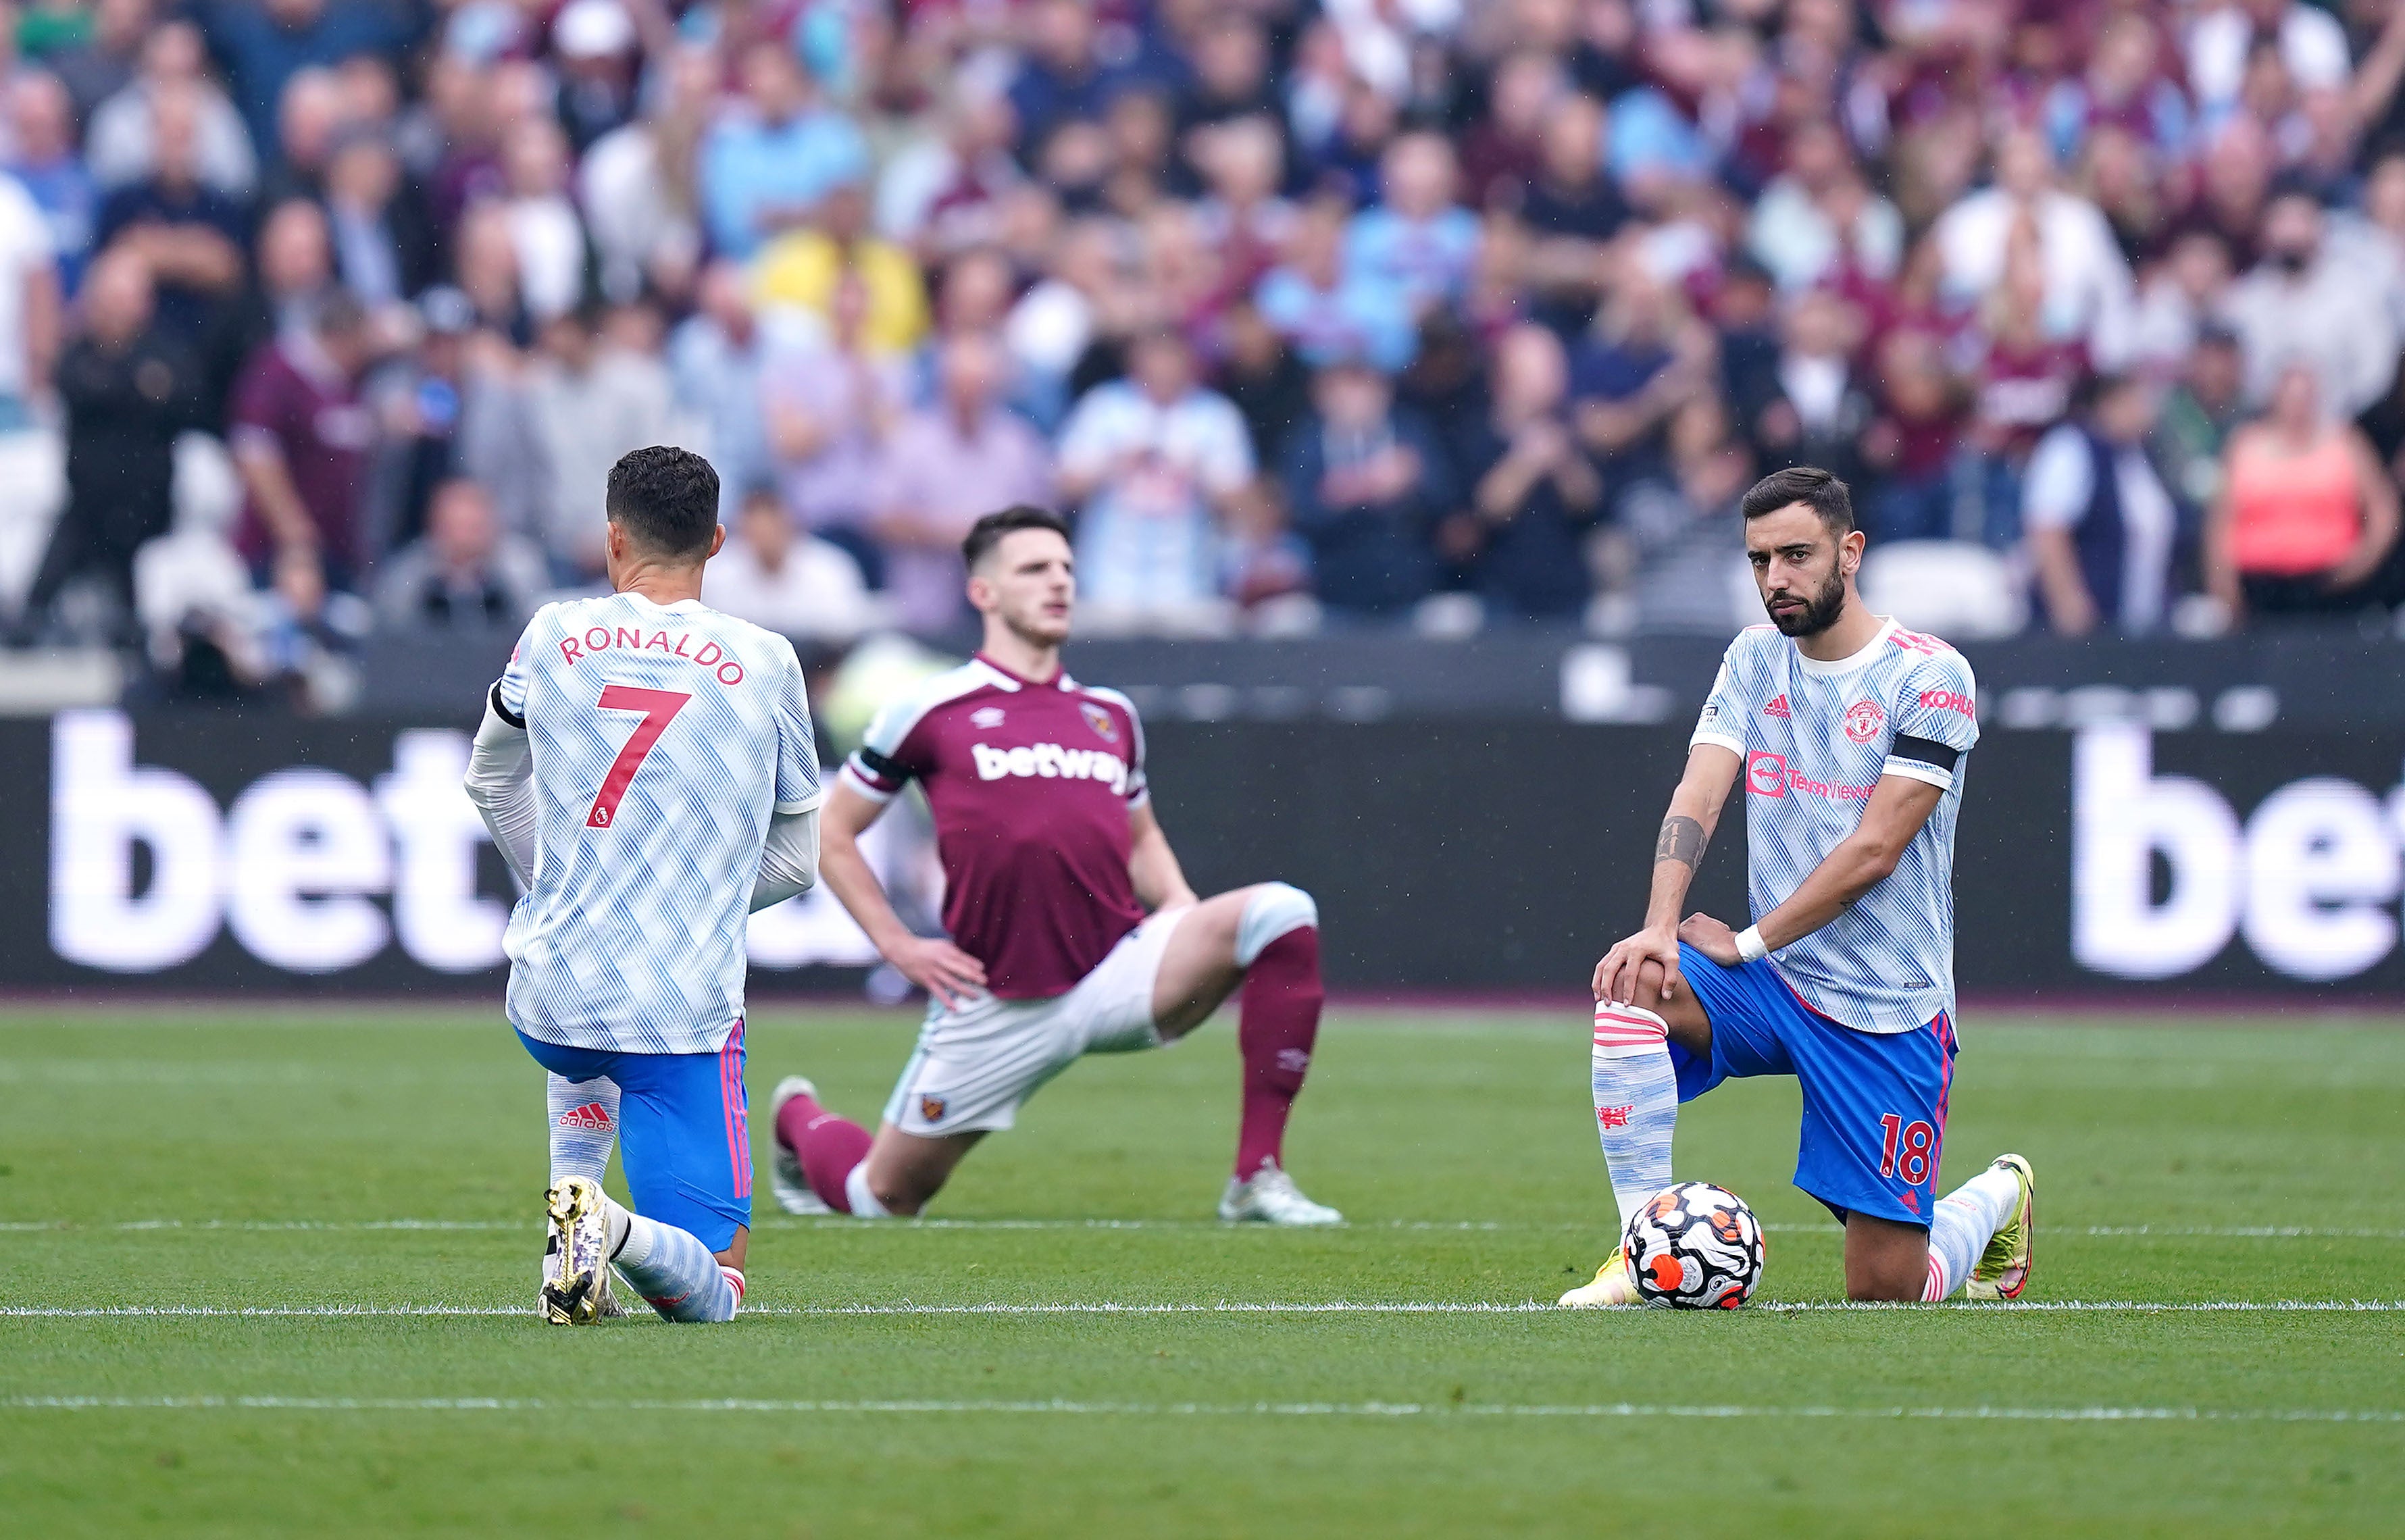 Manchester United’s Cristiano Ronaldo (left), Bruno Fernandes (right) and West Ham’s Declan Rice take a knee prior ahead of their Premier League match in September (Mike Egerton/PA).